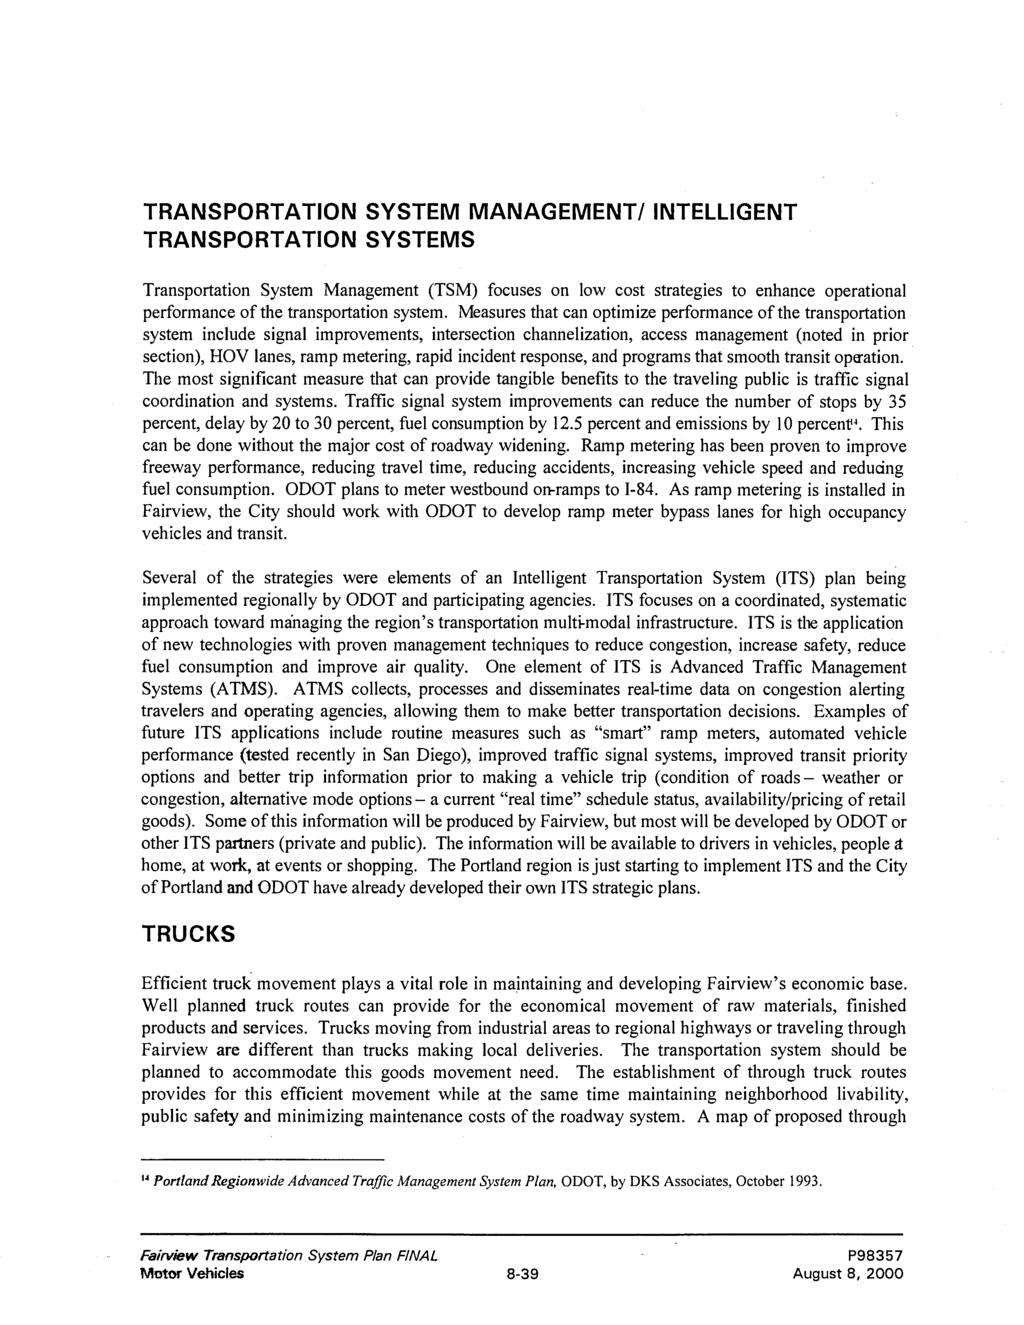 TRANSPORTATION SYSTEM MANAGEMENT1 INTELLIGENT TRANSPORTATION SYSTEMS Transportation System Management (TSM) focuses on low cost strategies to enhance operational performance of the transportation